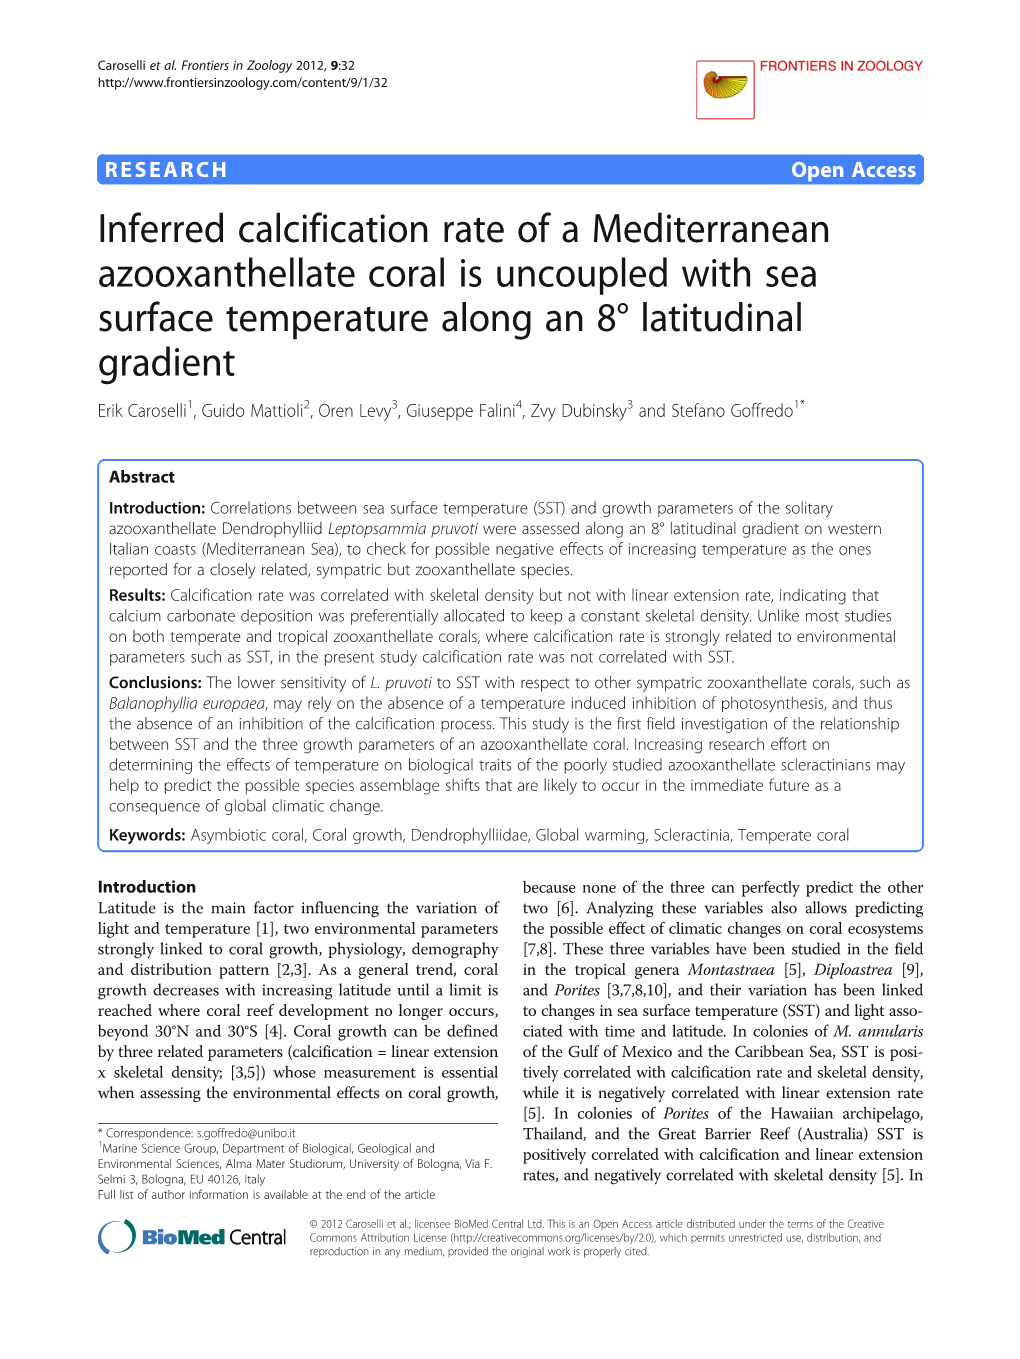 Inferred Calcification Rate of a Mediterranean Azooxanthellate